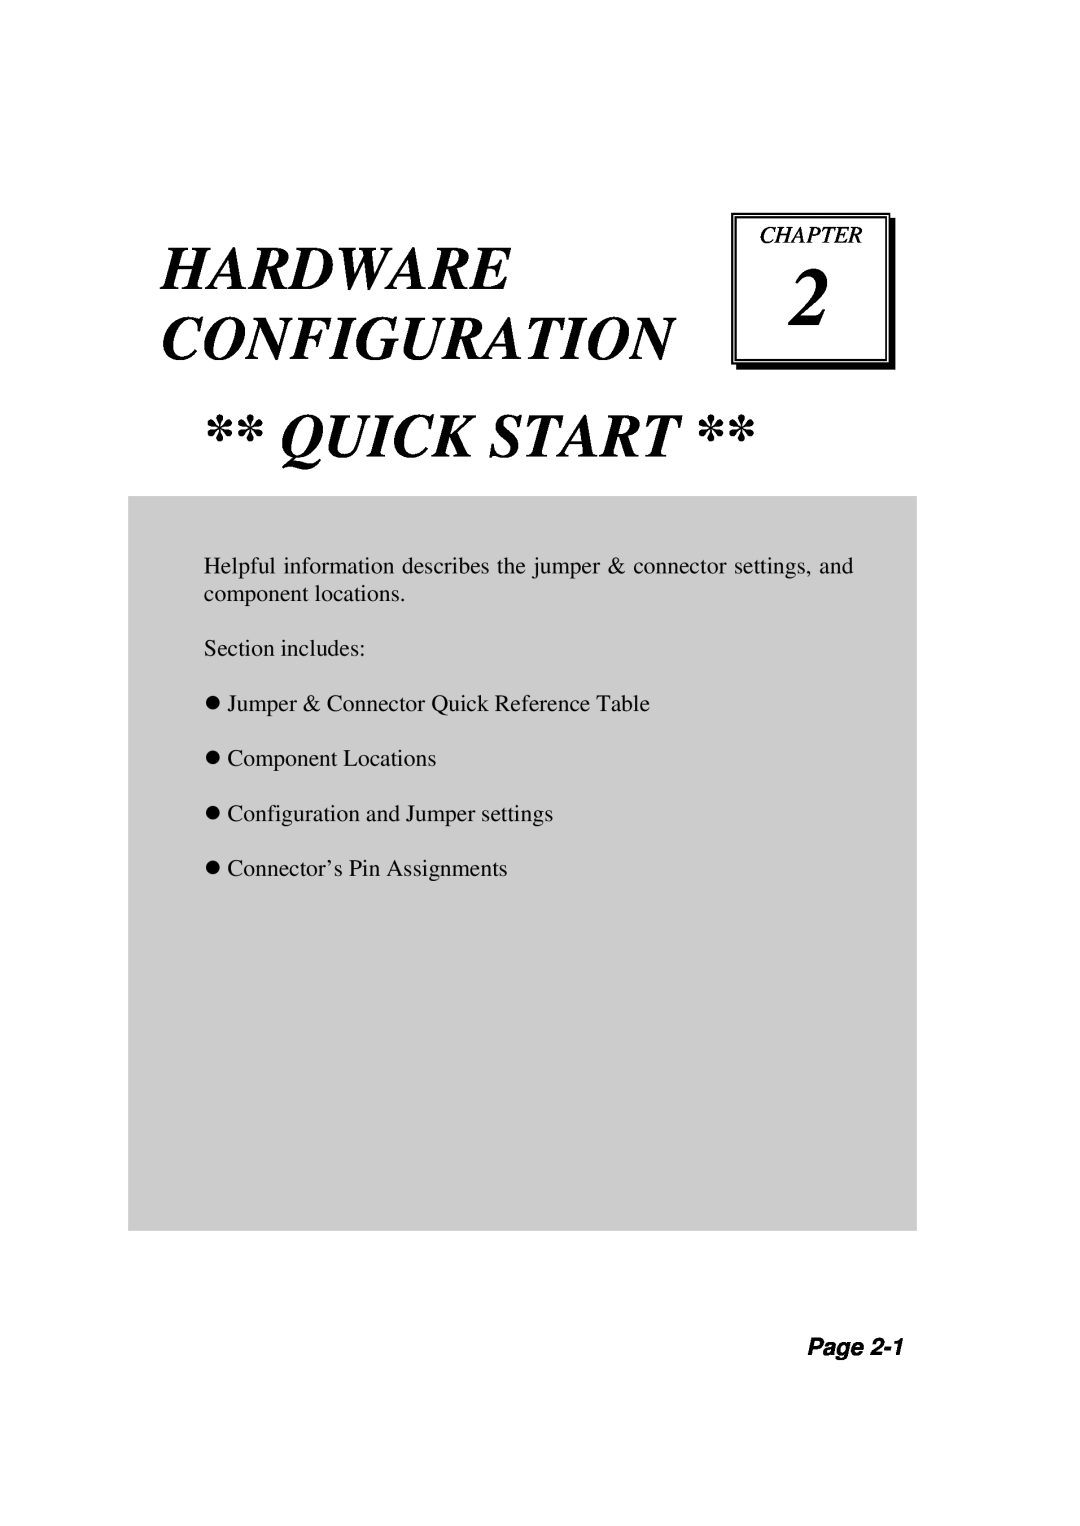 Intel PMB-531LF user manual Hardware, Configuration, Quick Start, Chapter, Page 